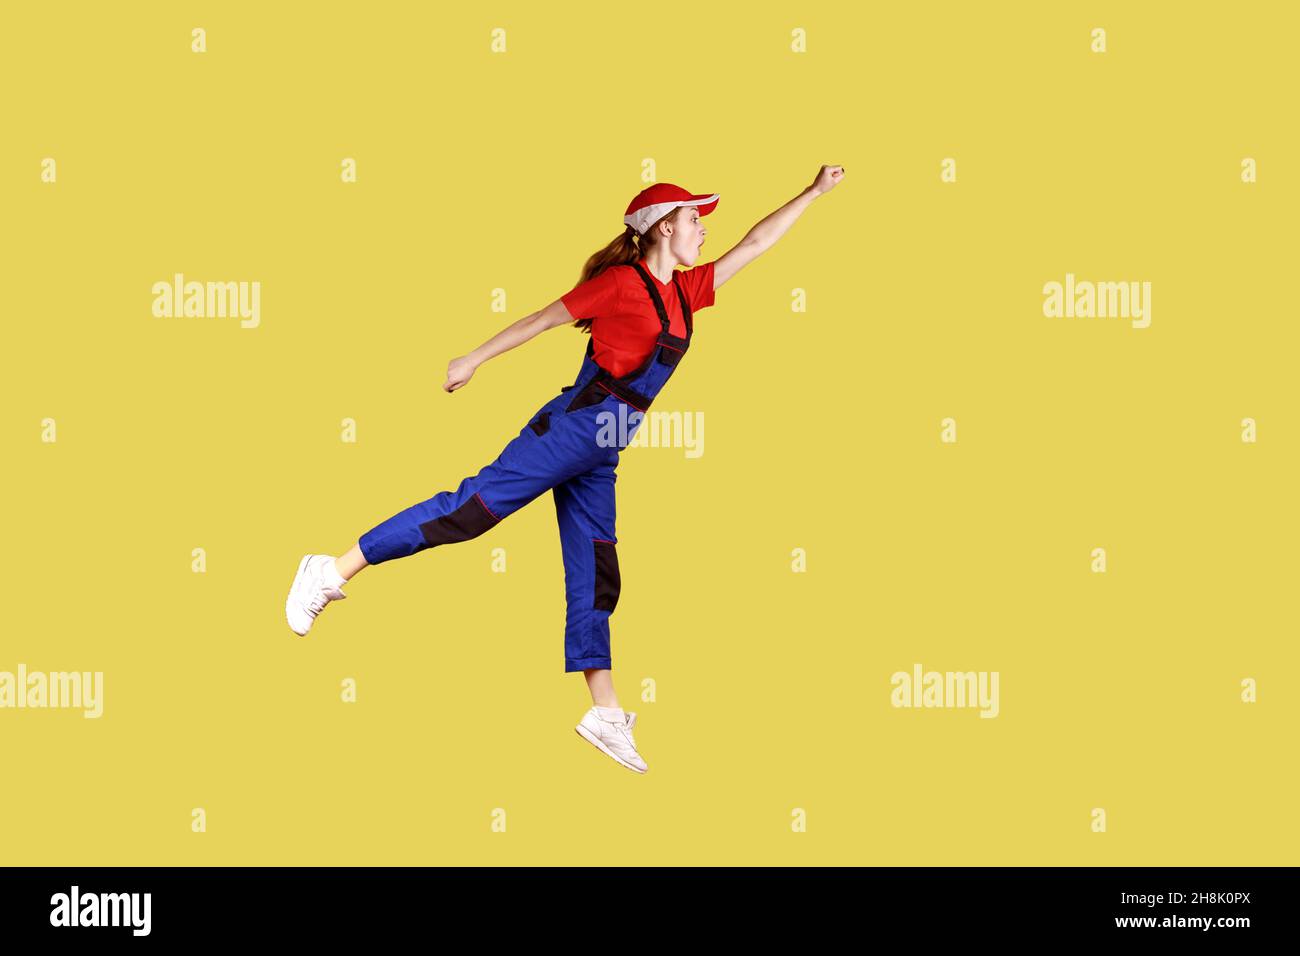 Side view portrait of woman worker flying to do her work like superhero, fast and high quality service, wearing work uniform and red cap. Indoor studio shot isolated on yellow background. Stock Photo